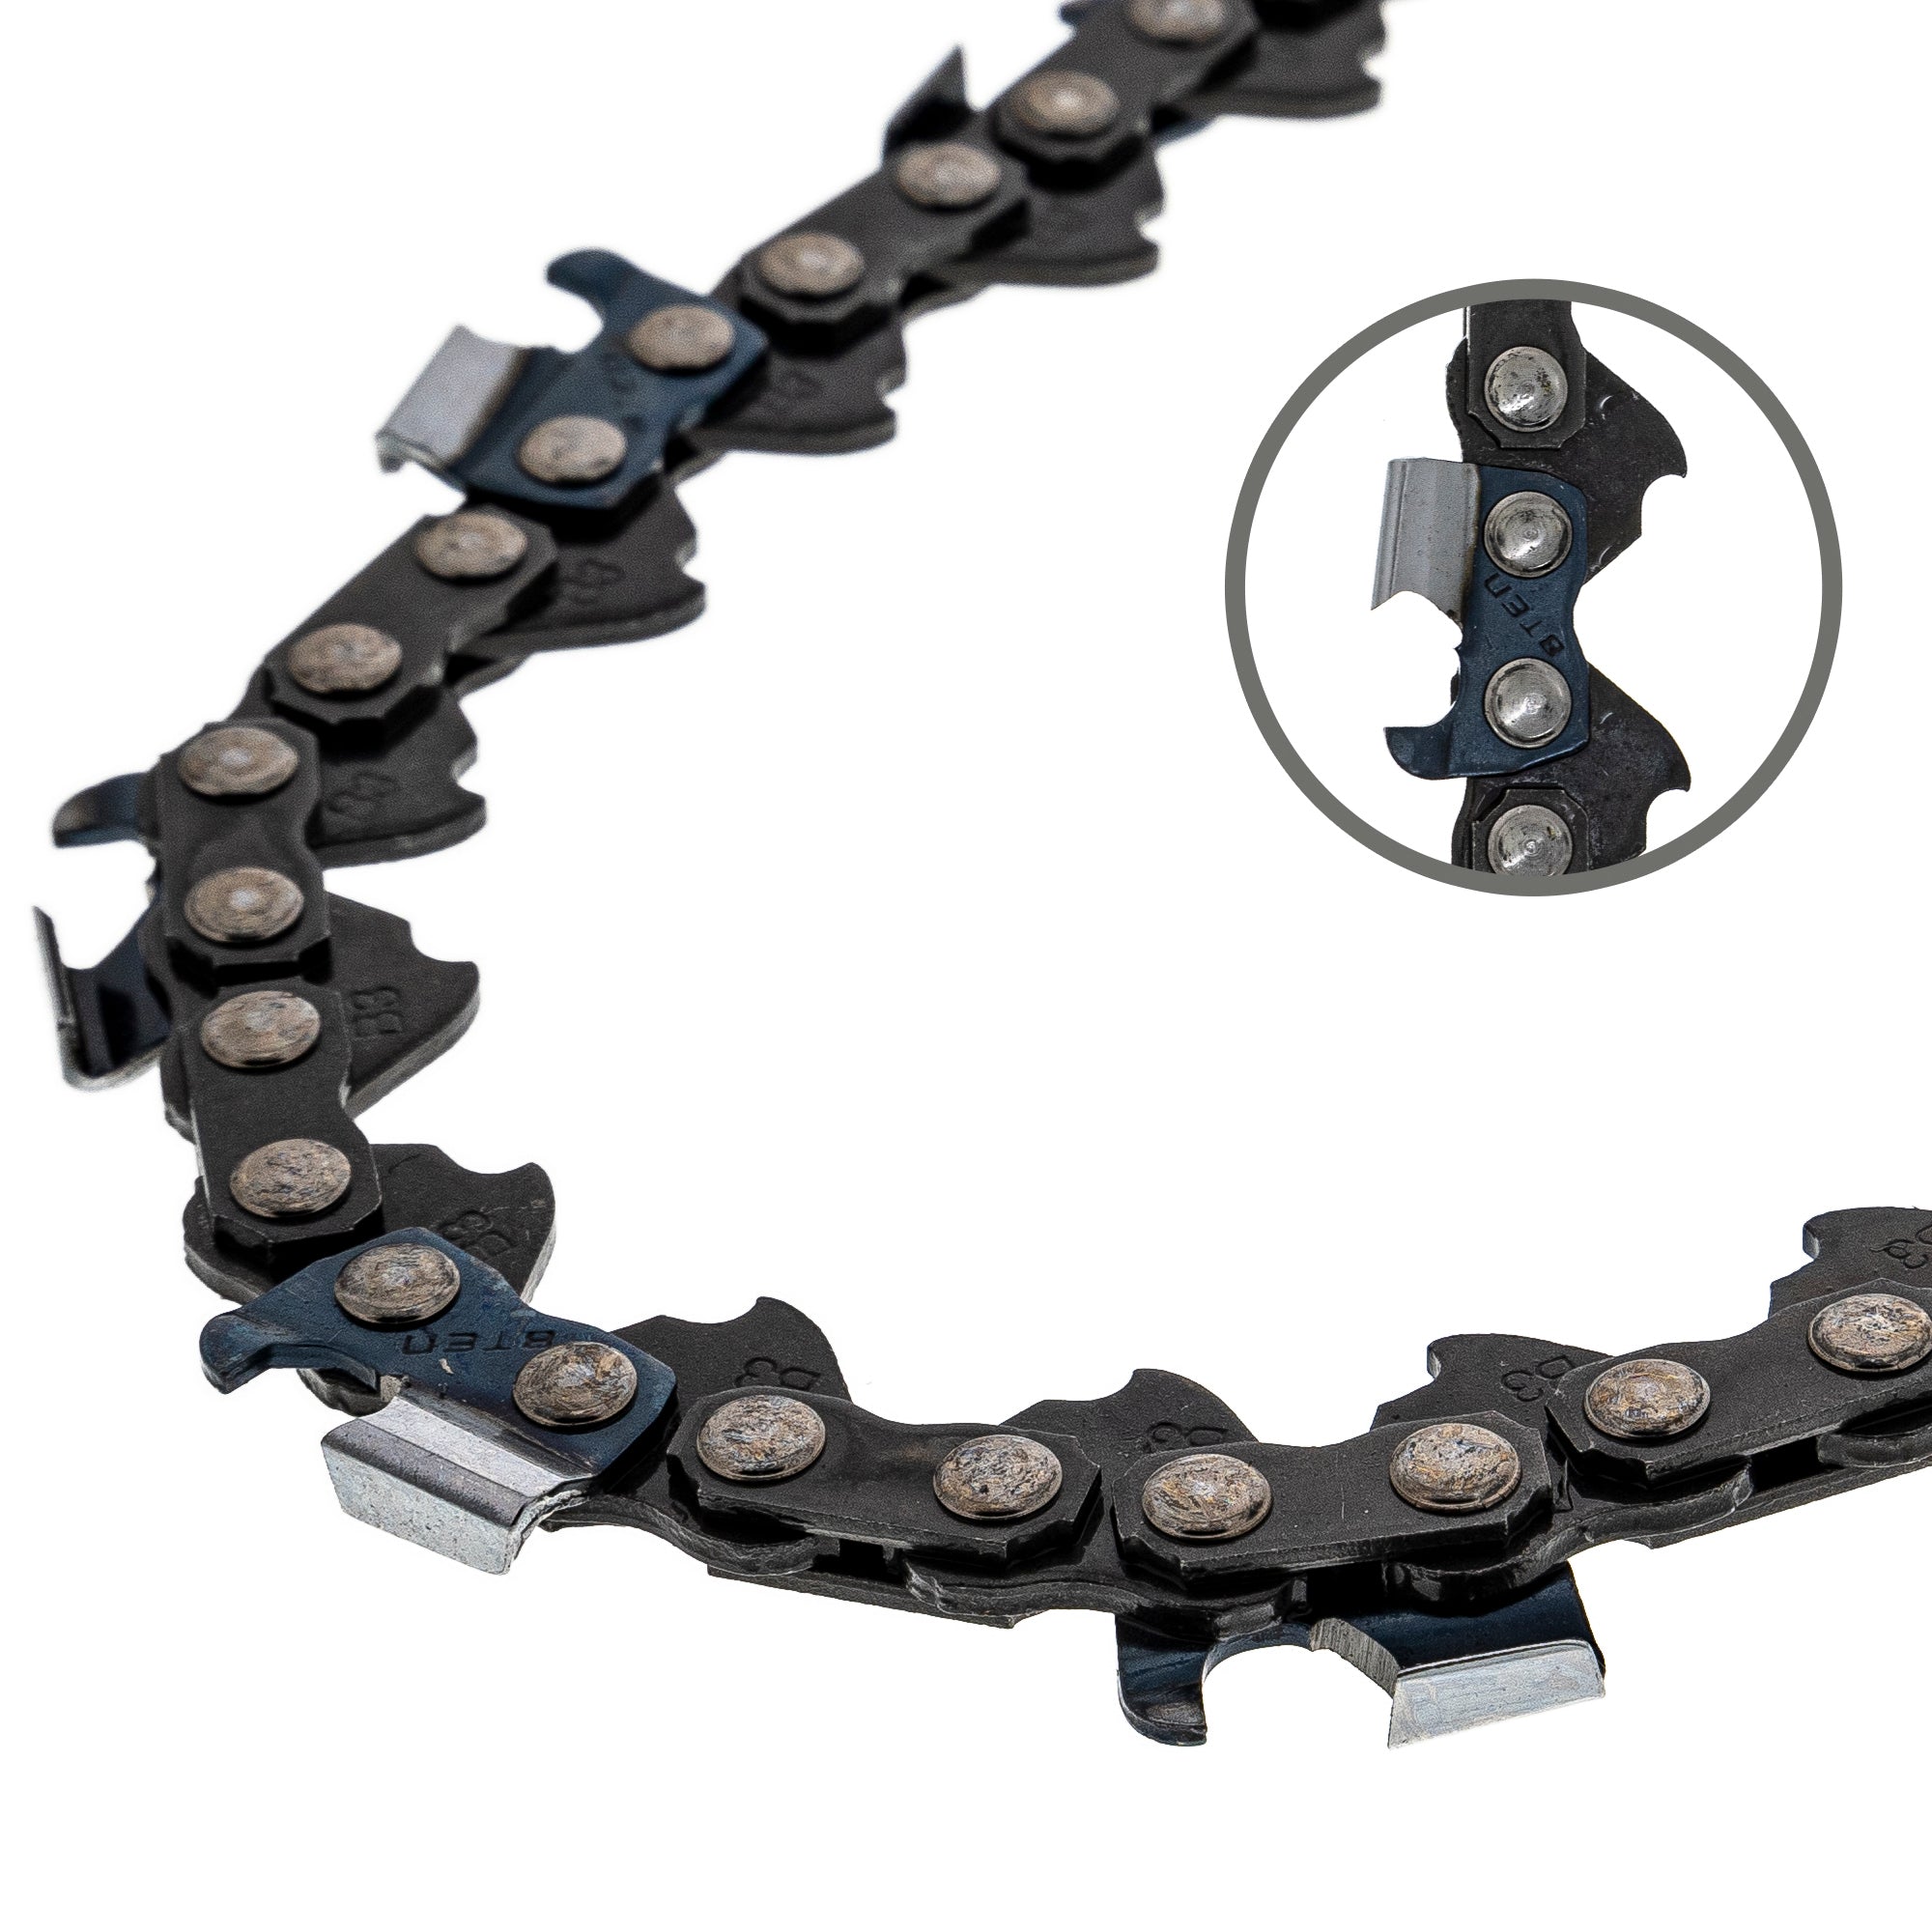 8TEN Chain 5-Pack 75EXJ115G 75EXL115G H50S115 36RSF115